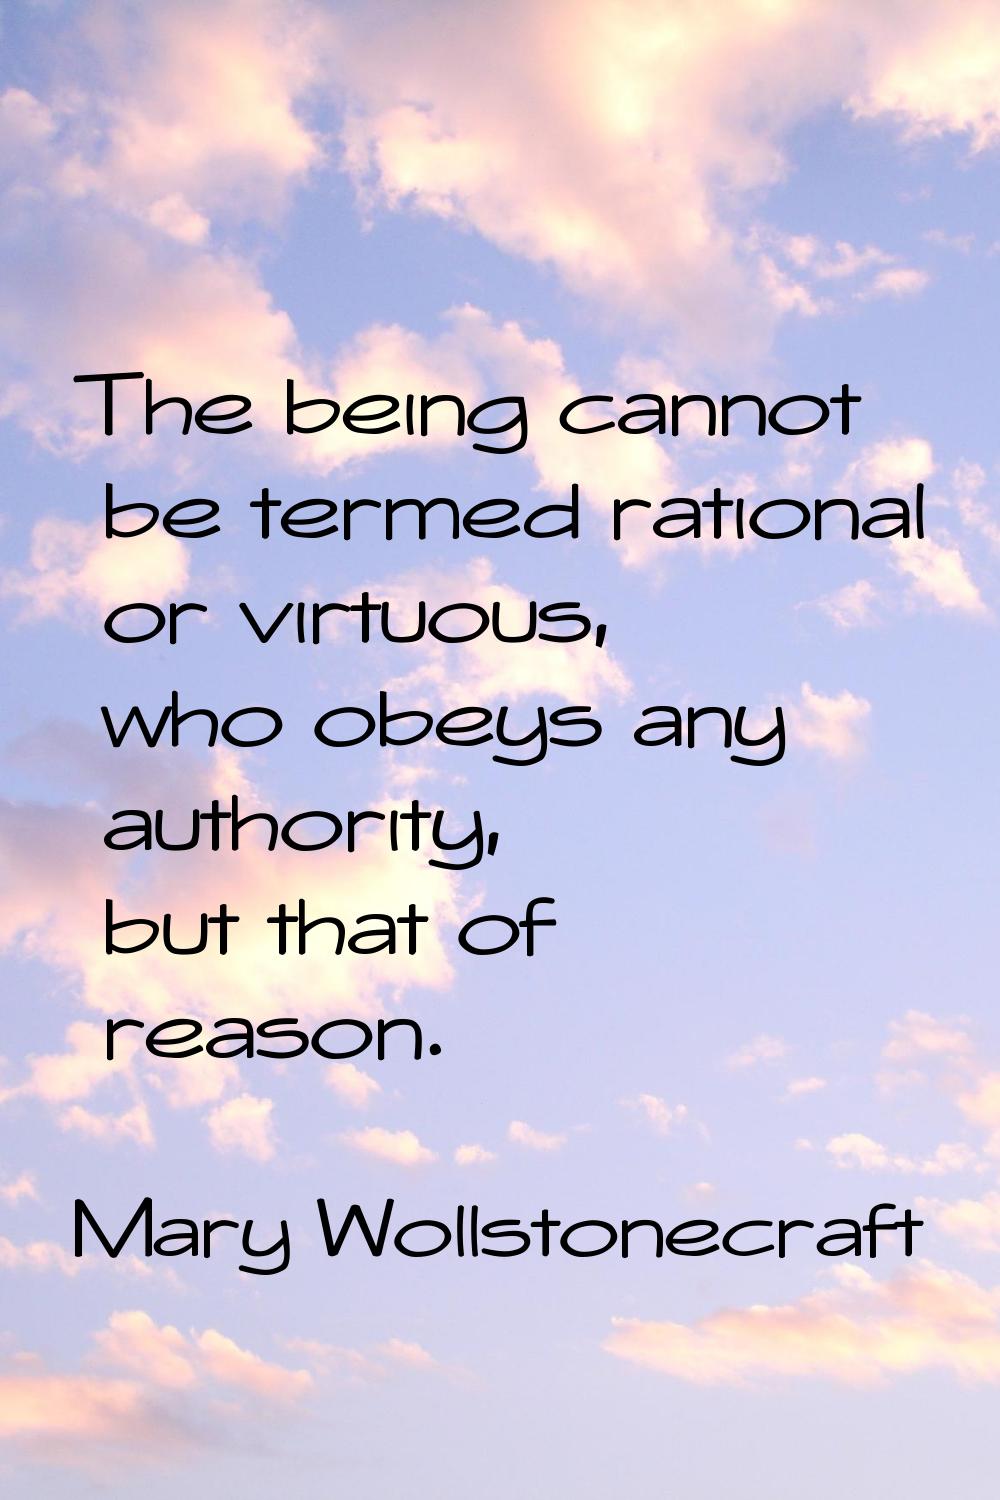 The being cannot be termed rational or virtuous, who obeys any authority, but that of reason.